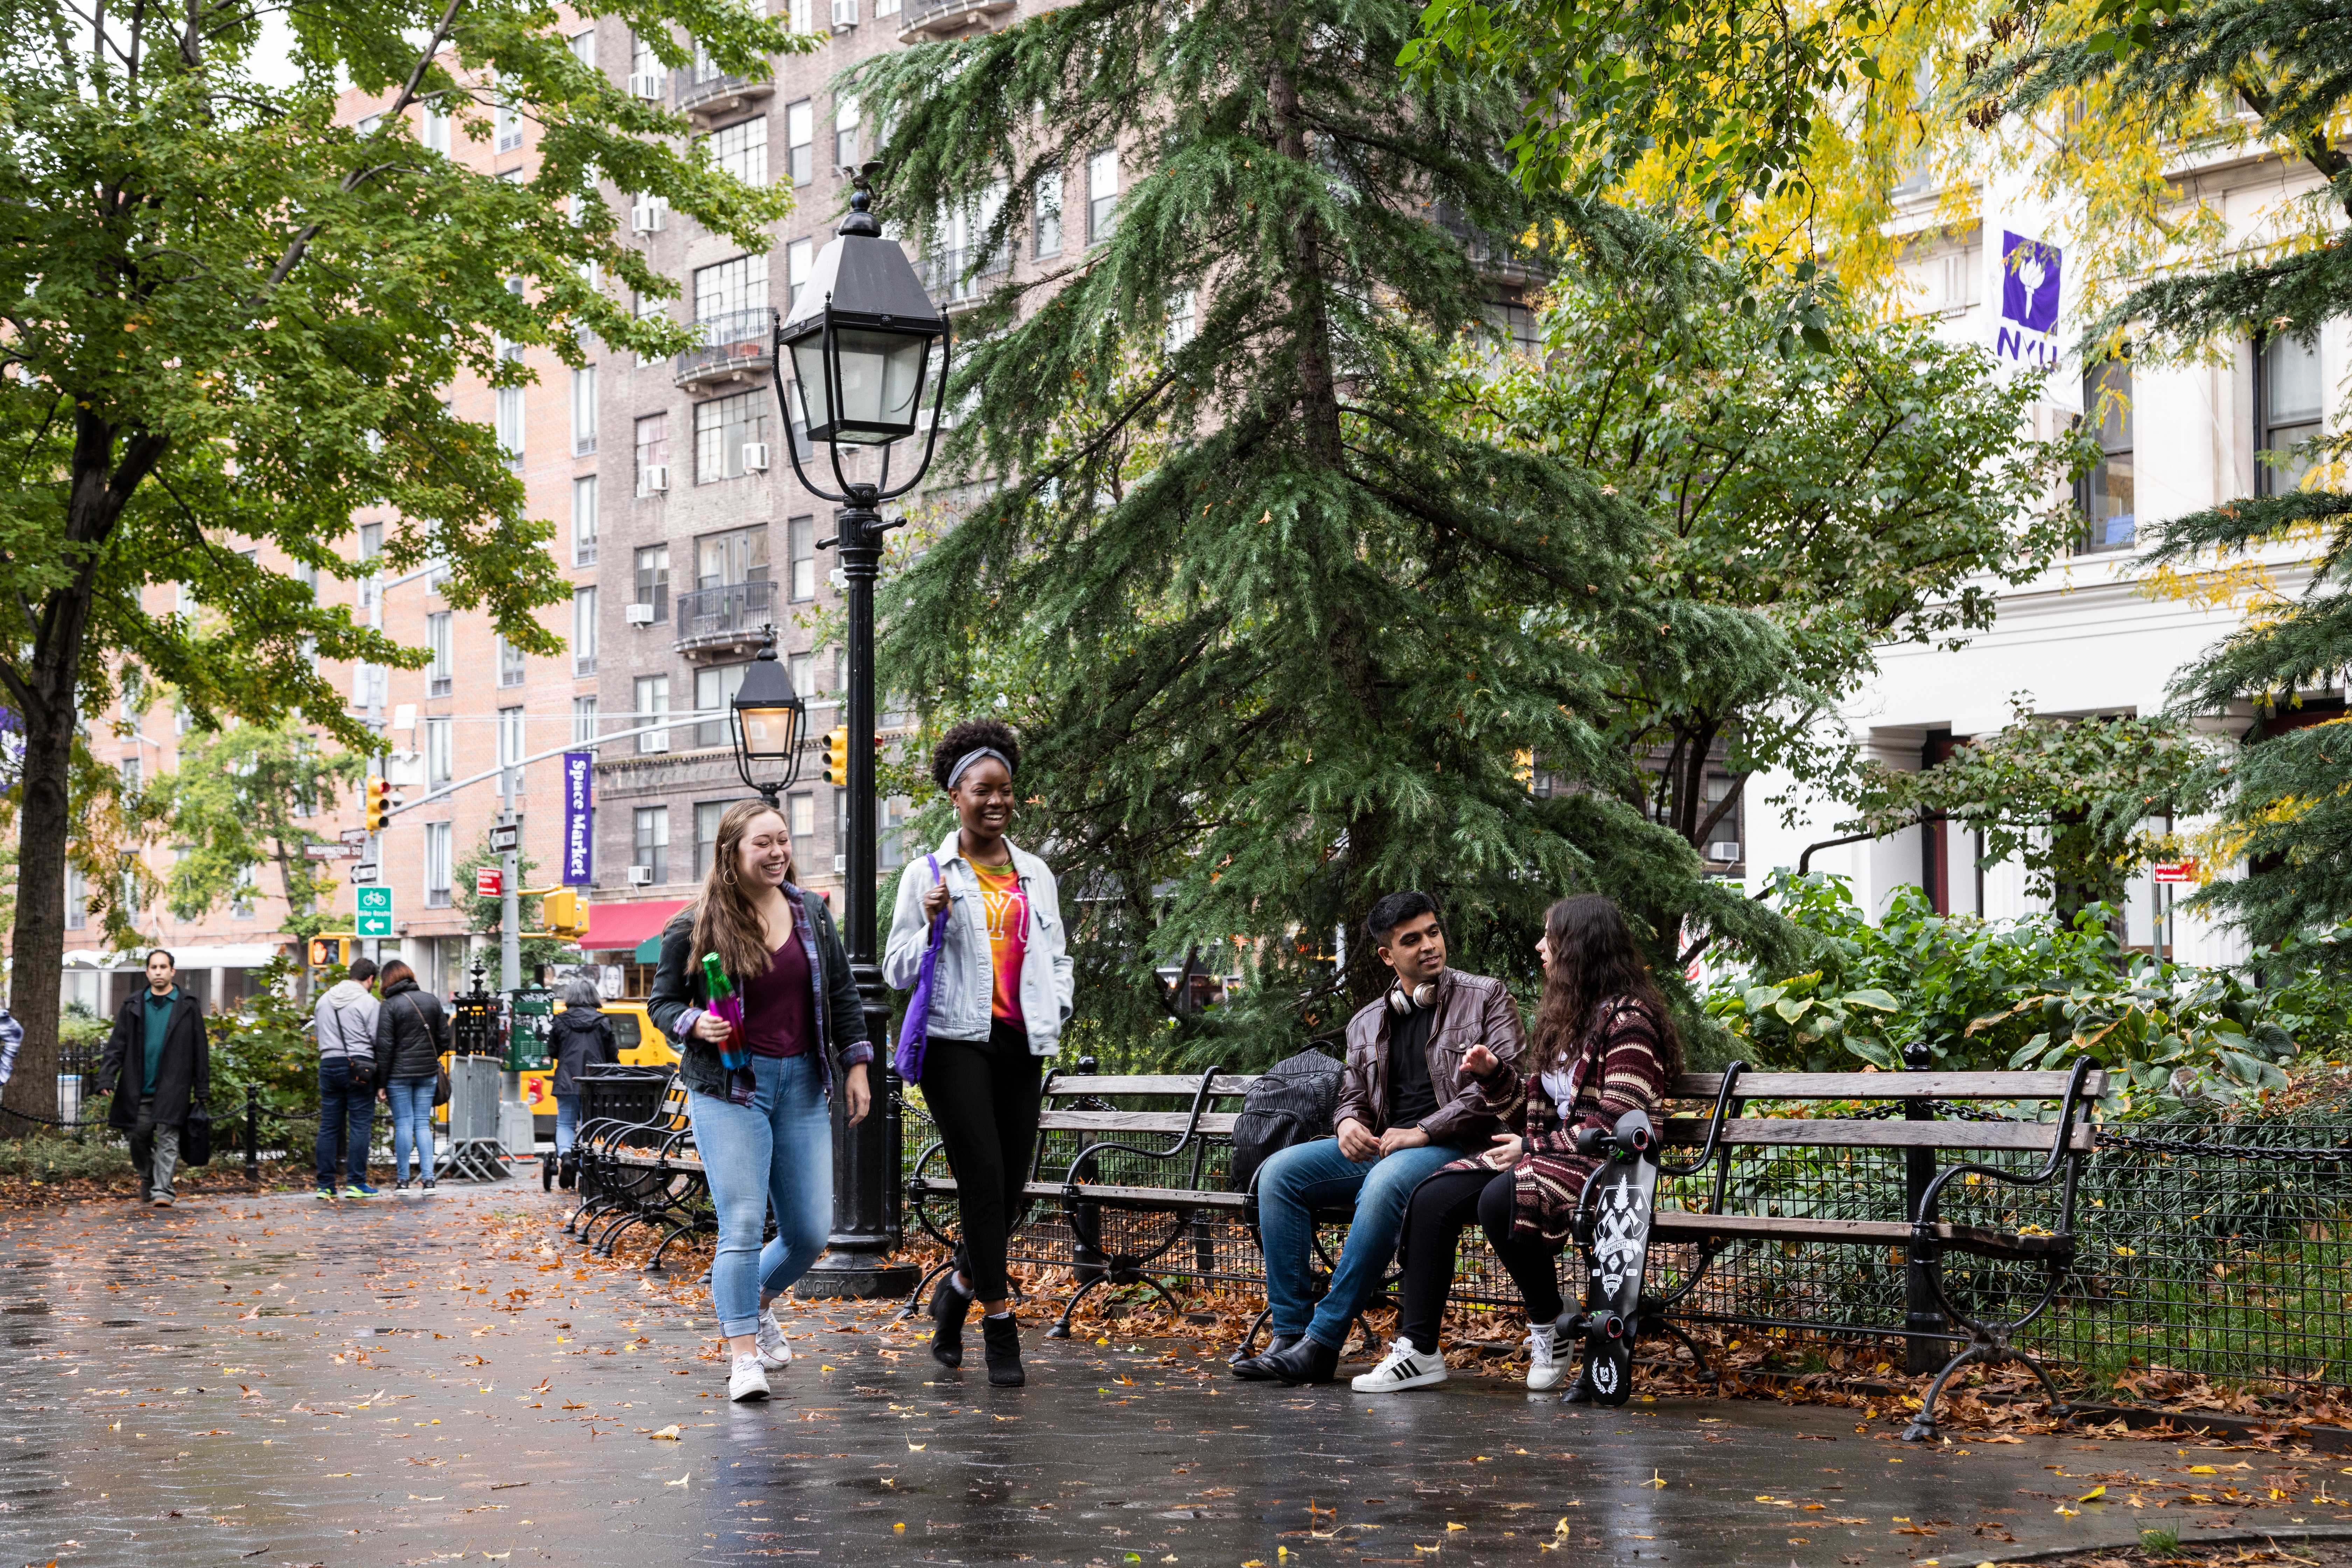 Students walking and sitting in Washington Square Park.